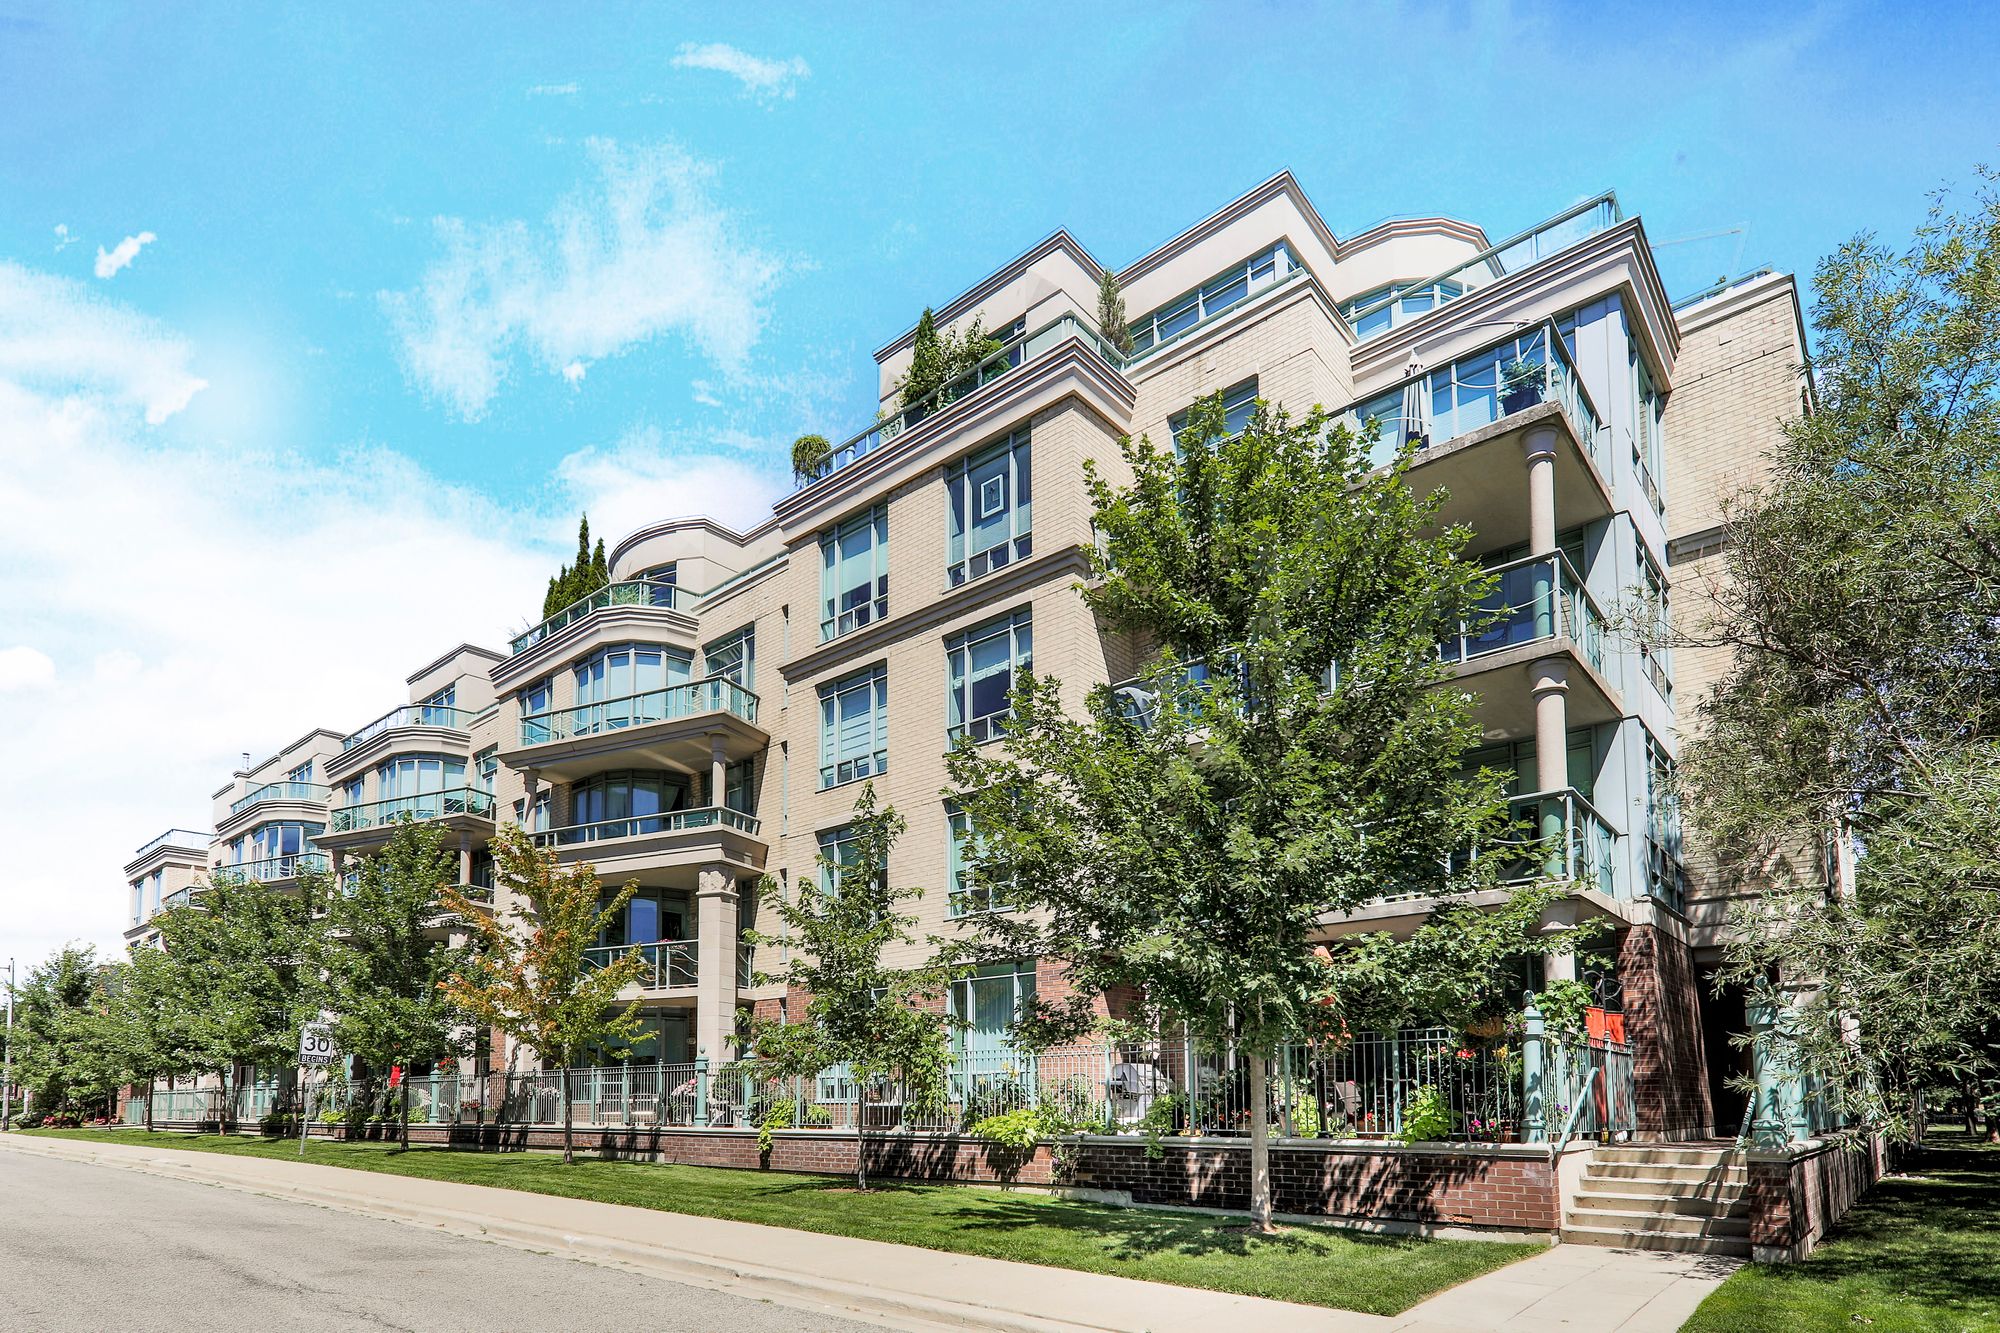 35 Boardwalk Dr. This condo townhouse at The Boardwalk is located in  East End, Toronto - image #1 of 5 by Strata.ca